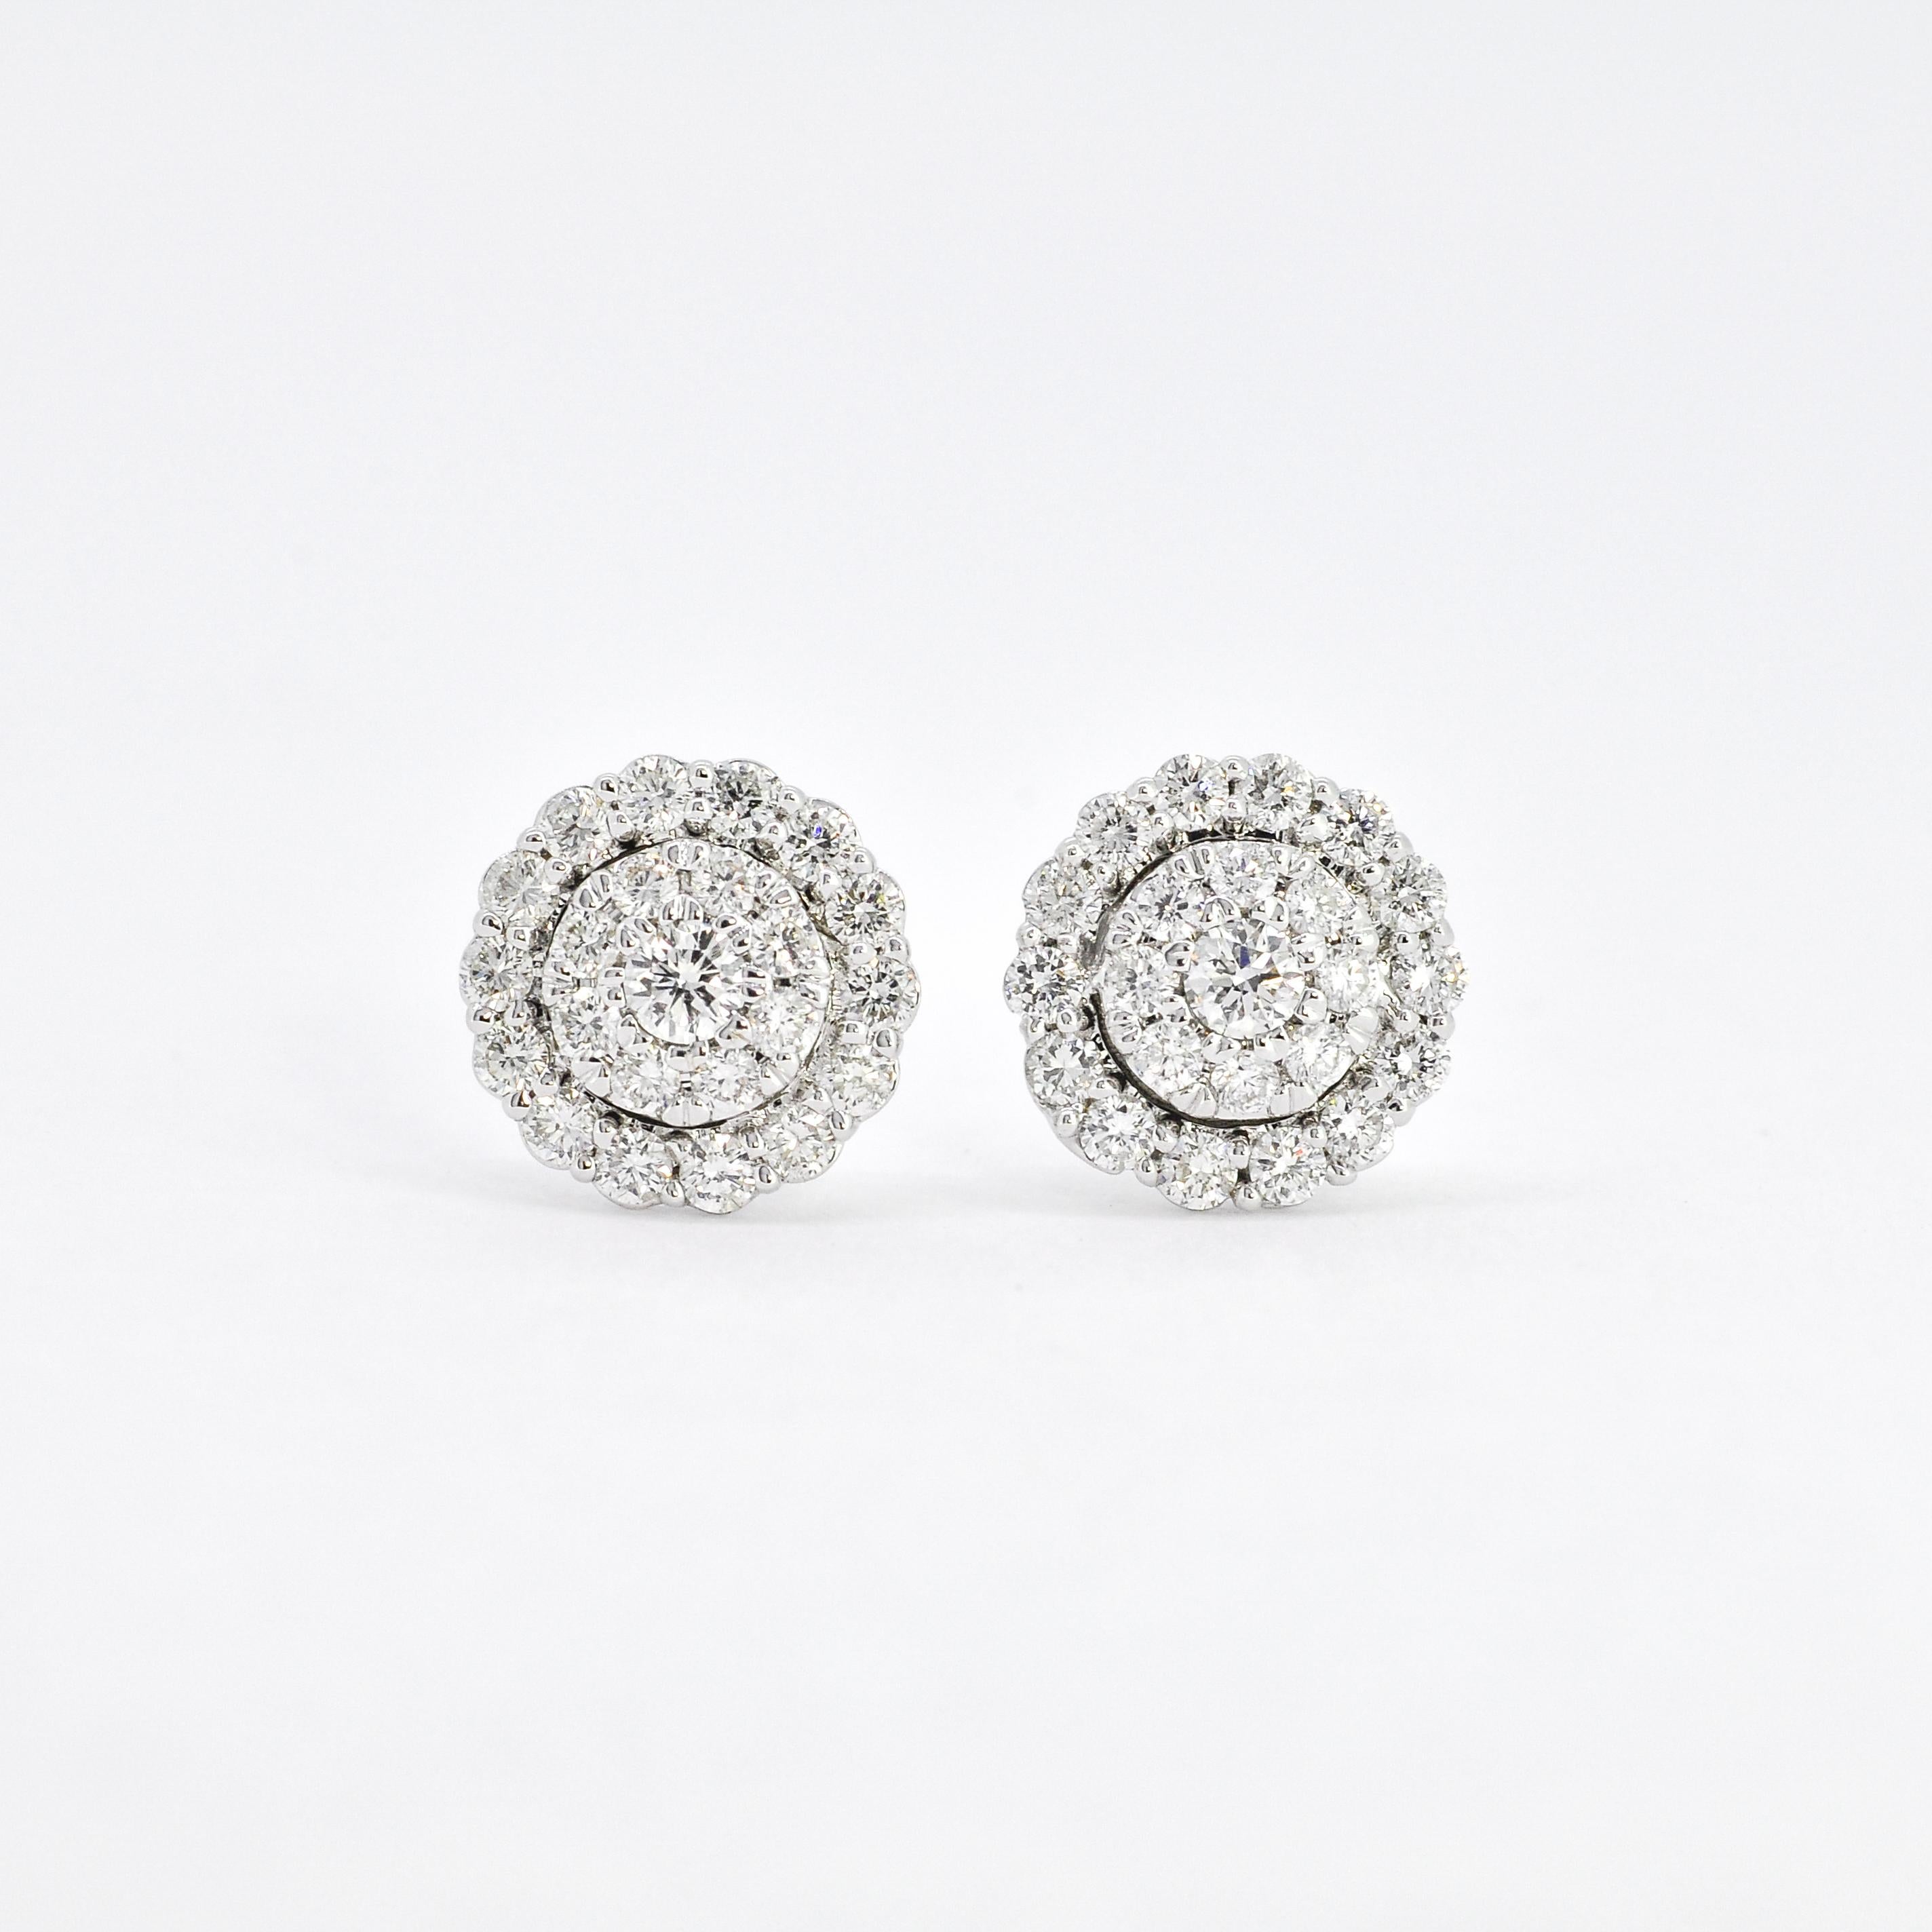 Round diamond cluster white gold double halo earrings are a stunning example of vintage-inspired jewelry with a timeless and elegant design. These earrings features a round-cut diamond in the center, surrounded by two halos of smaller diamonds set